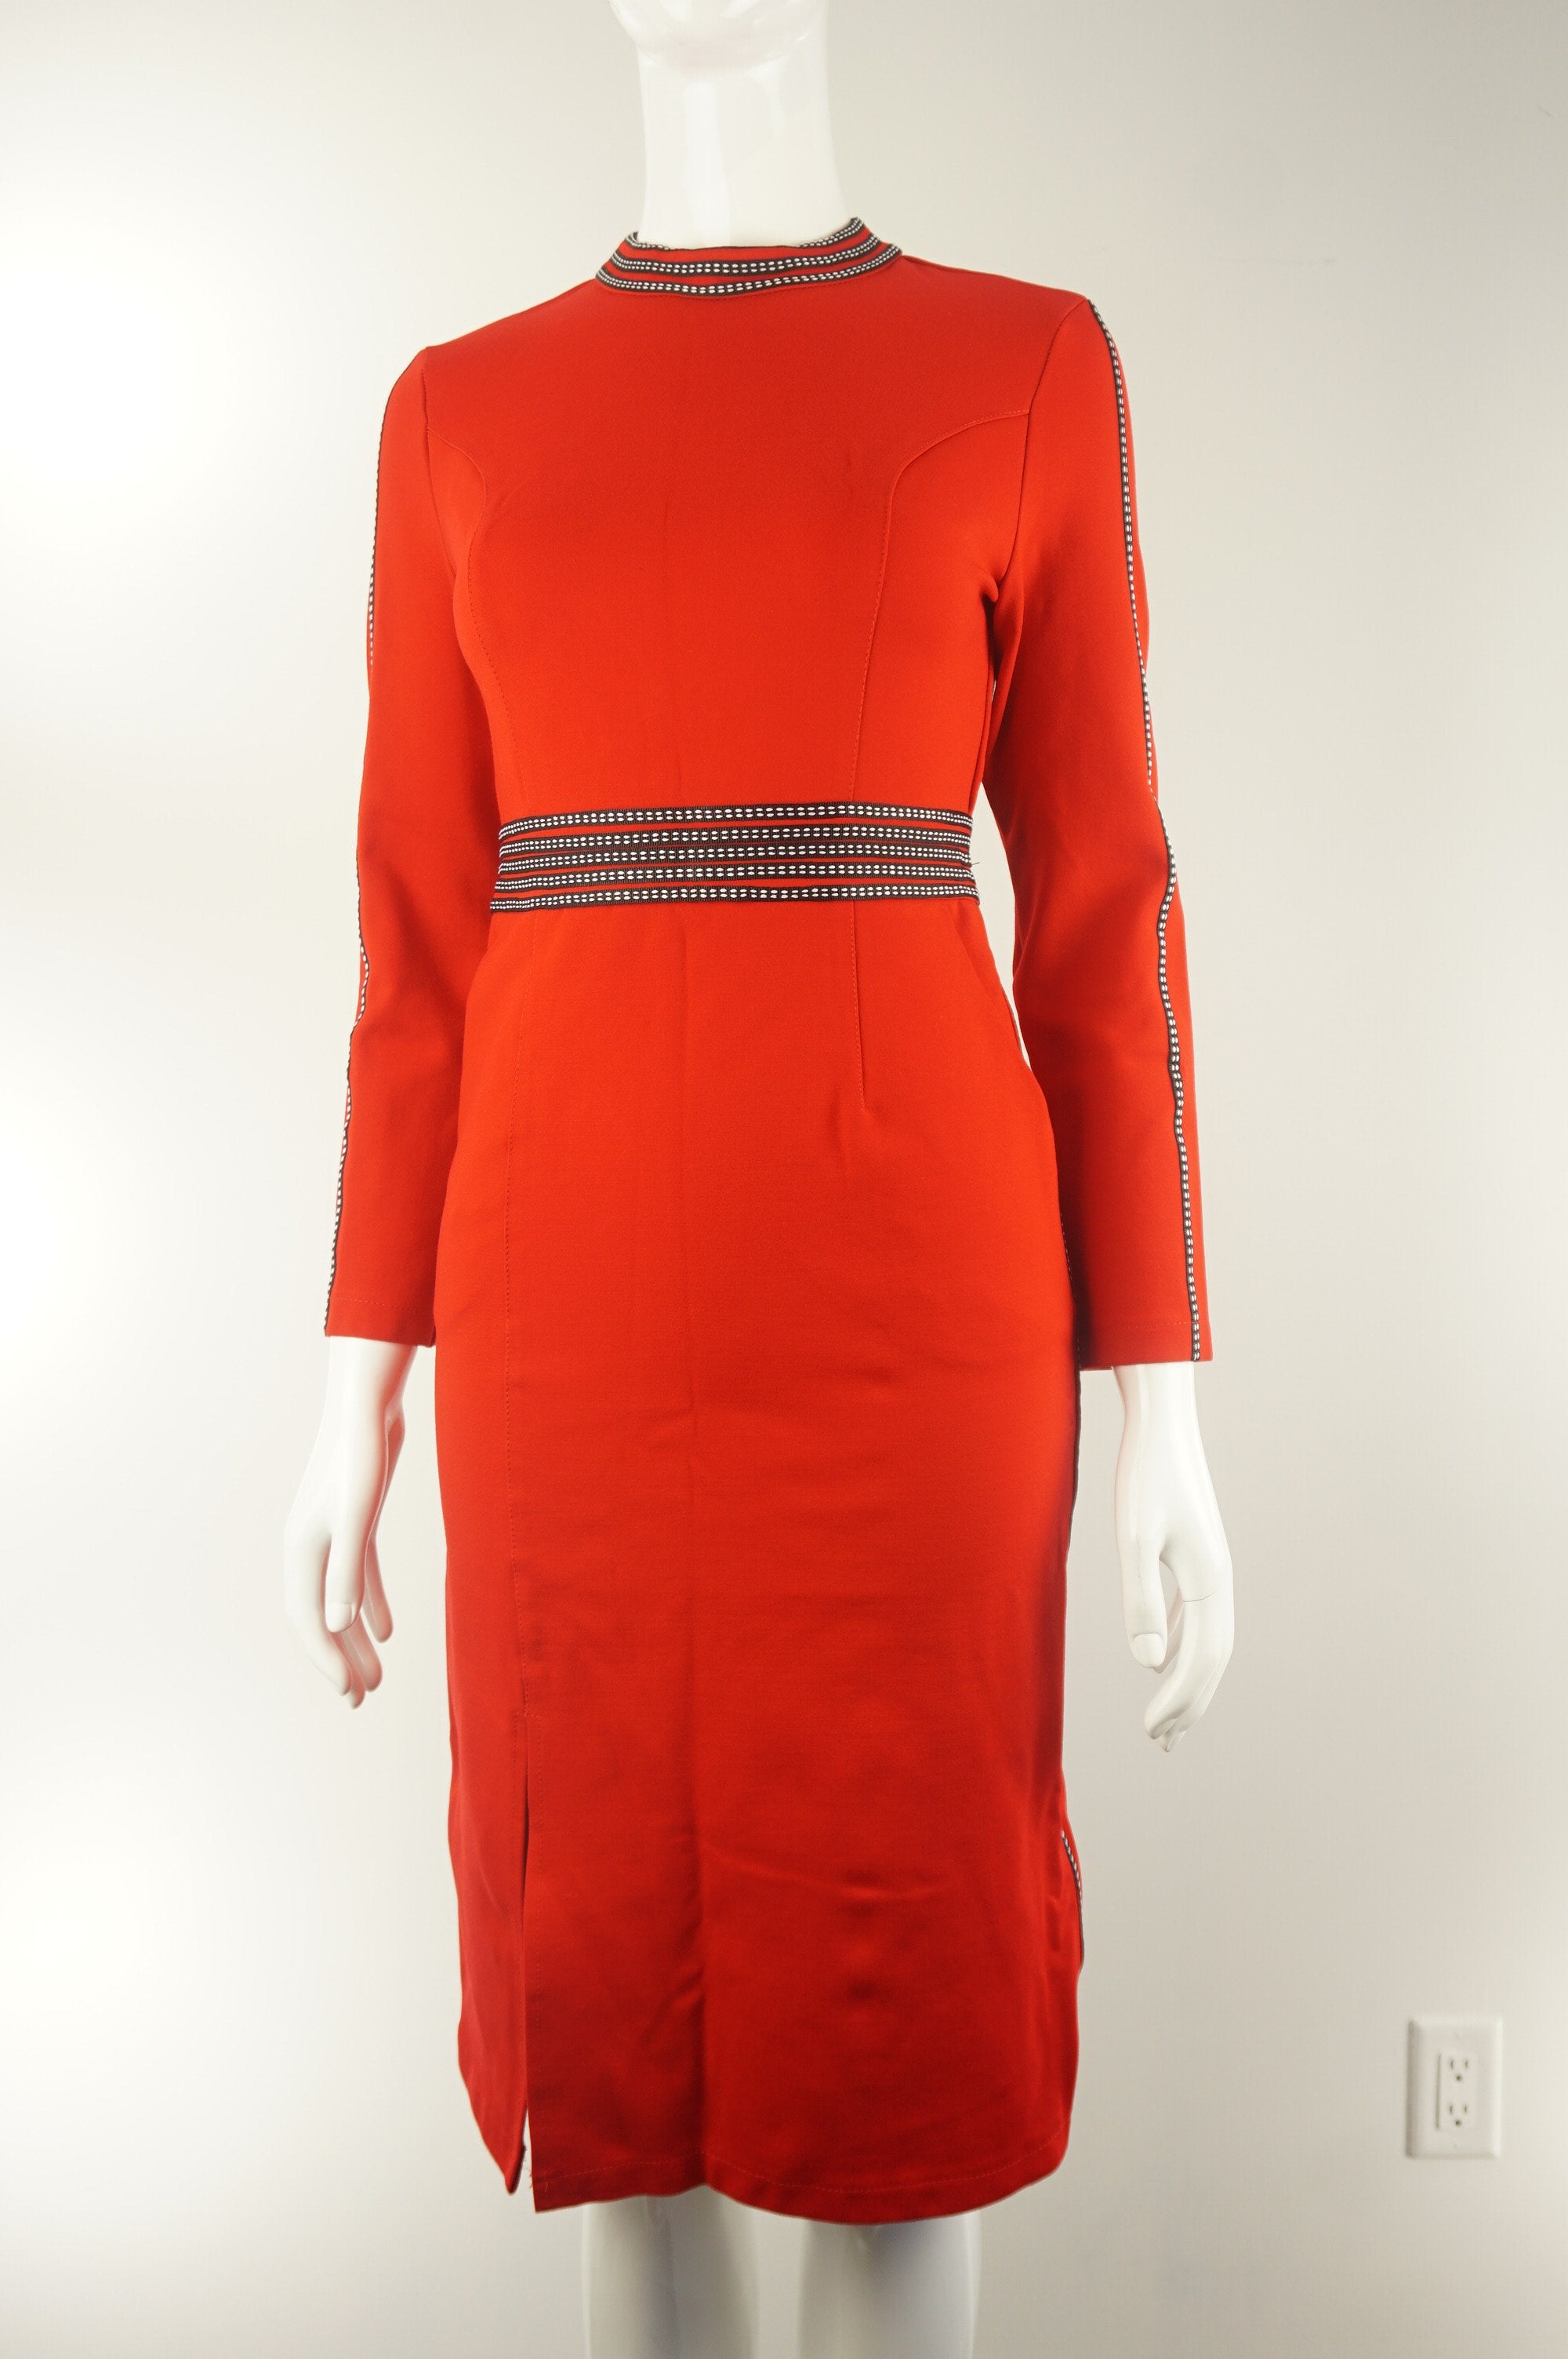 Elli Share Elegant Red Long Sleeve Dress, Elegant red dress with thick fabric. Wear this to a professional event (when we eventually can!) and stand out with the bright color and unique design., Red, Cotton and spandex, women's Dresses & Rompers, women's Red Dresses & Rompers, Elli Share women's Dresses & Rompers, elegant red high neck formal dress, professional midi pencil dress with high heck décor waist long sleeves, long thick red dress, long formal red dress